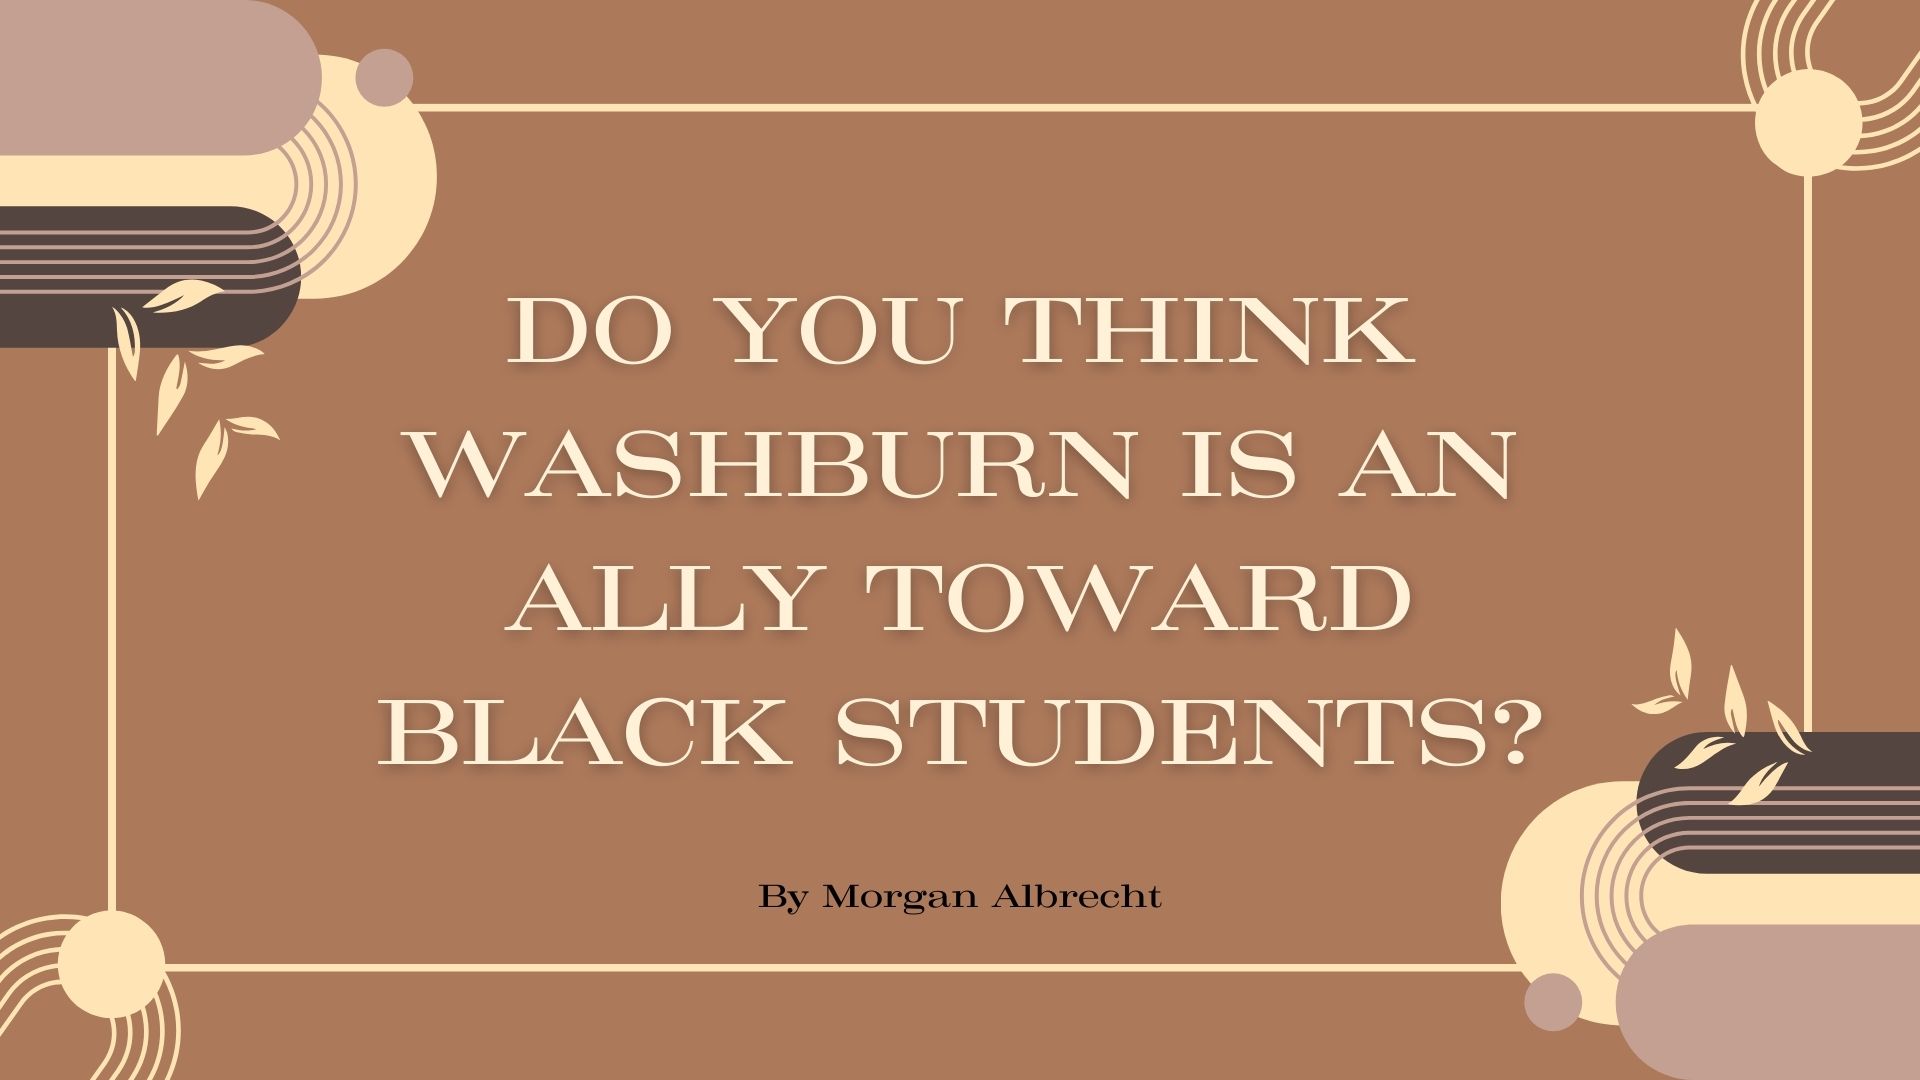 B.O.B: Do you think Washburn is an ally towards Black students?